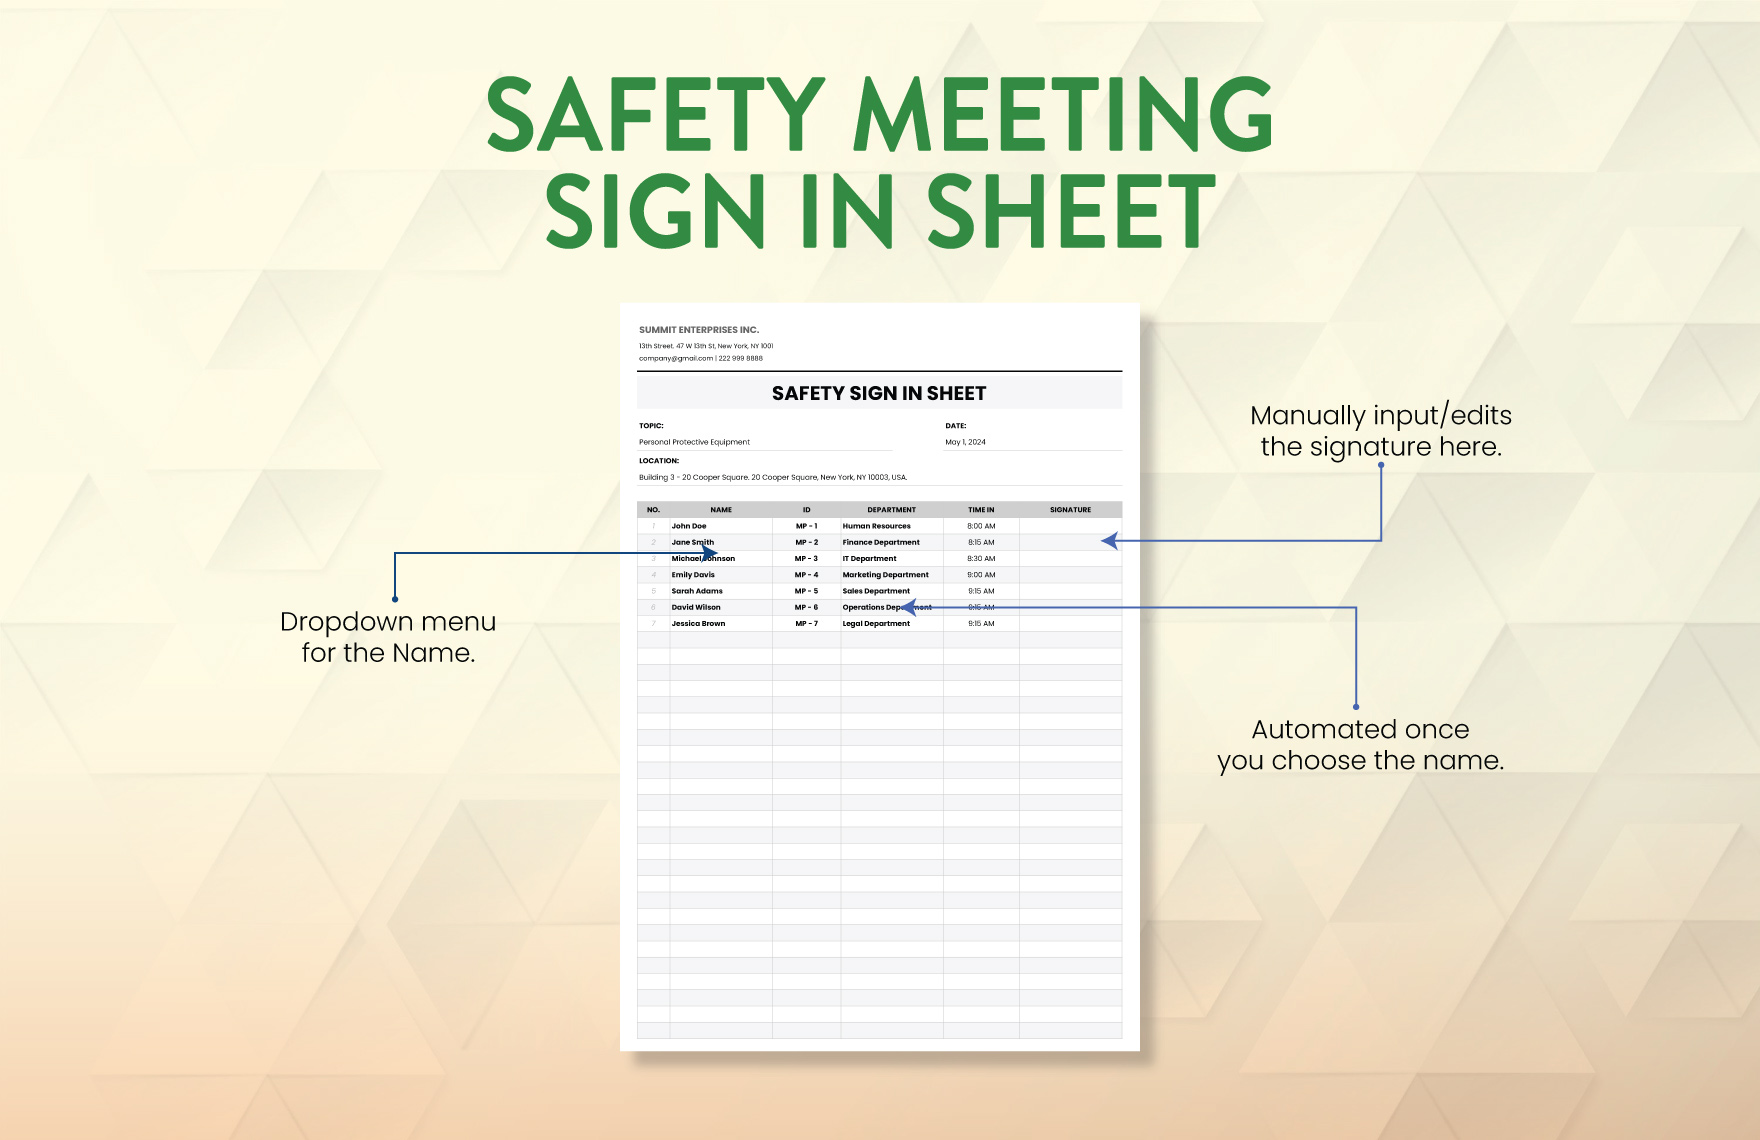 Safety Meeting Sign in Sheet Template